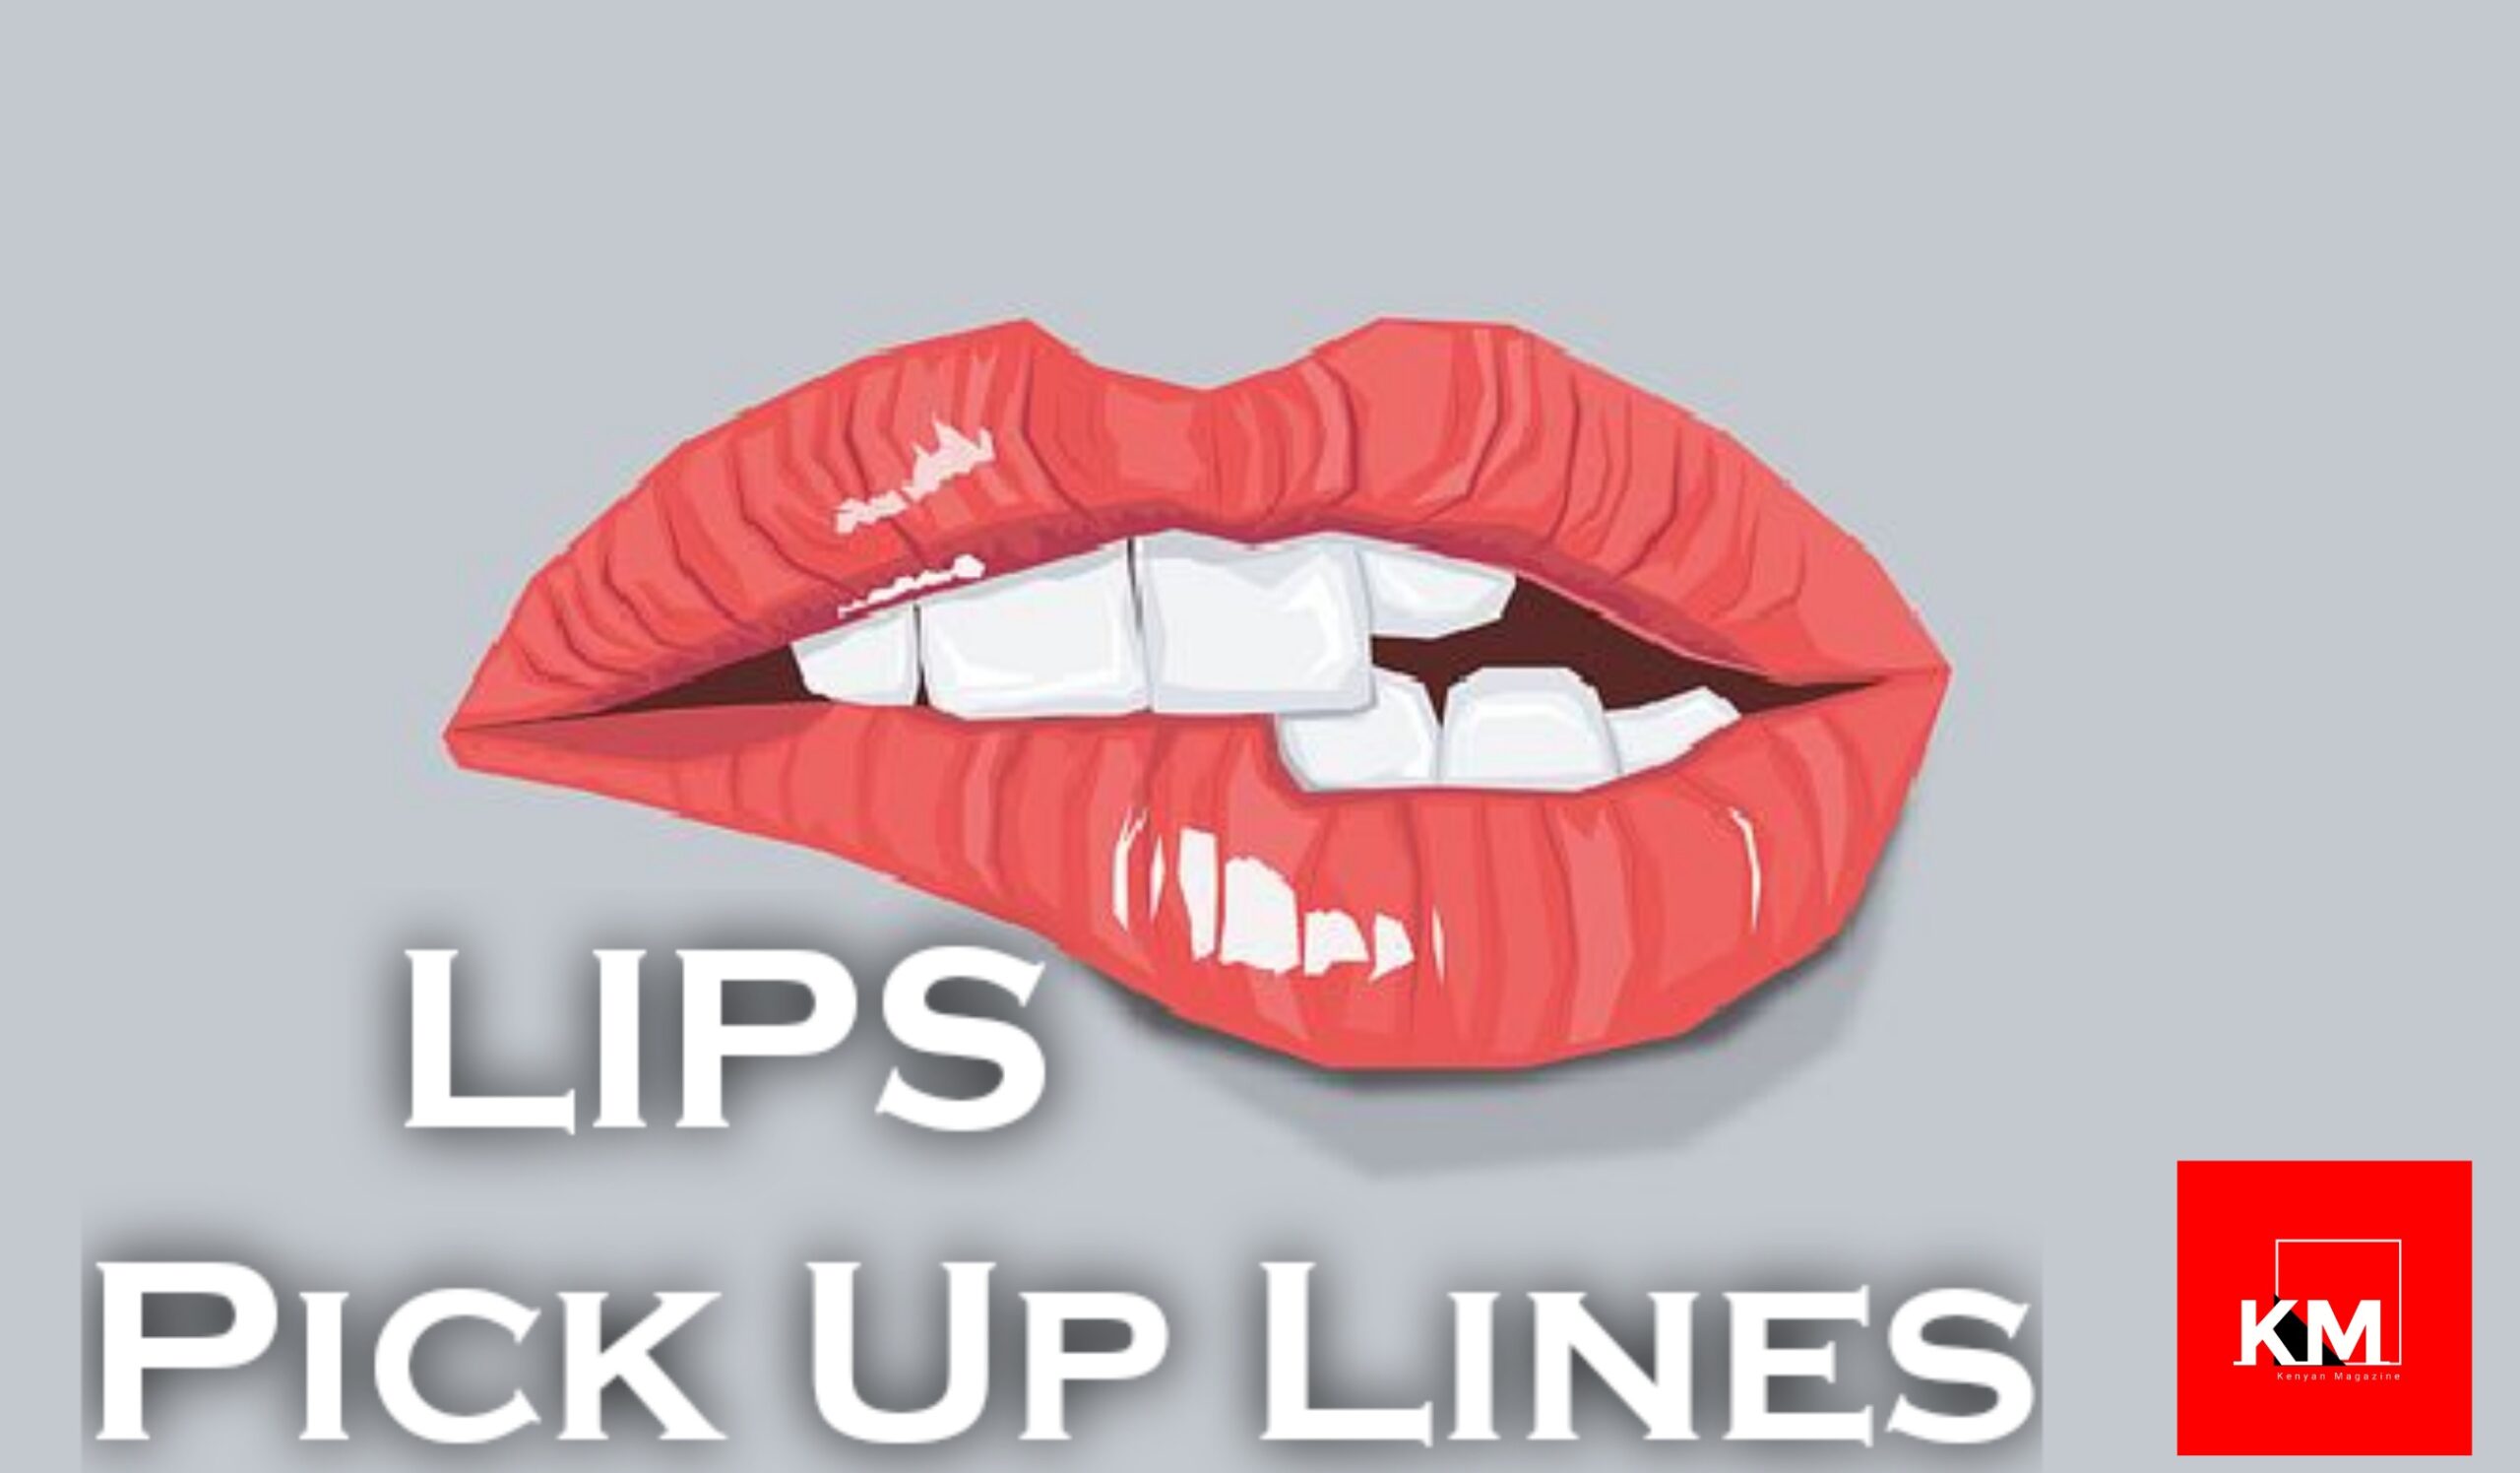 Lips Pick up lines